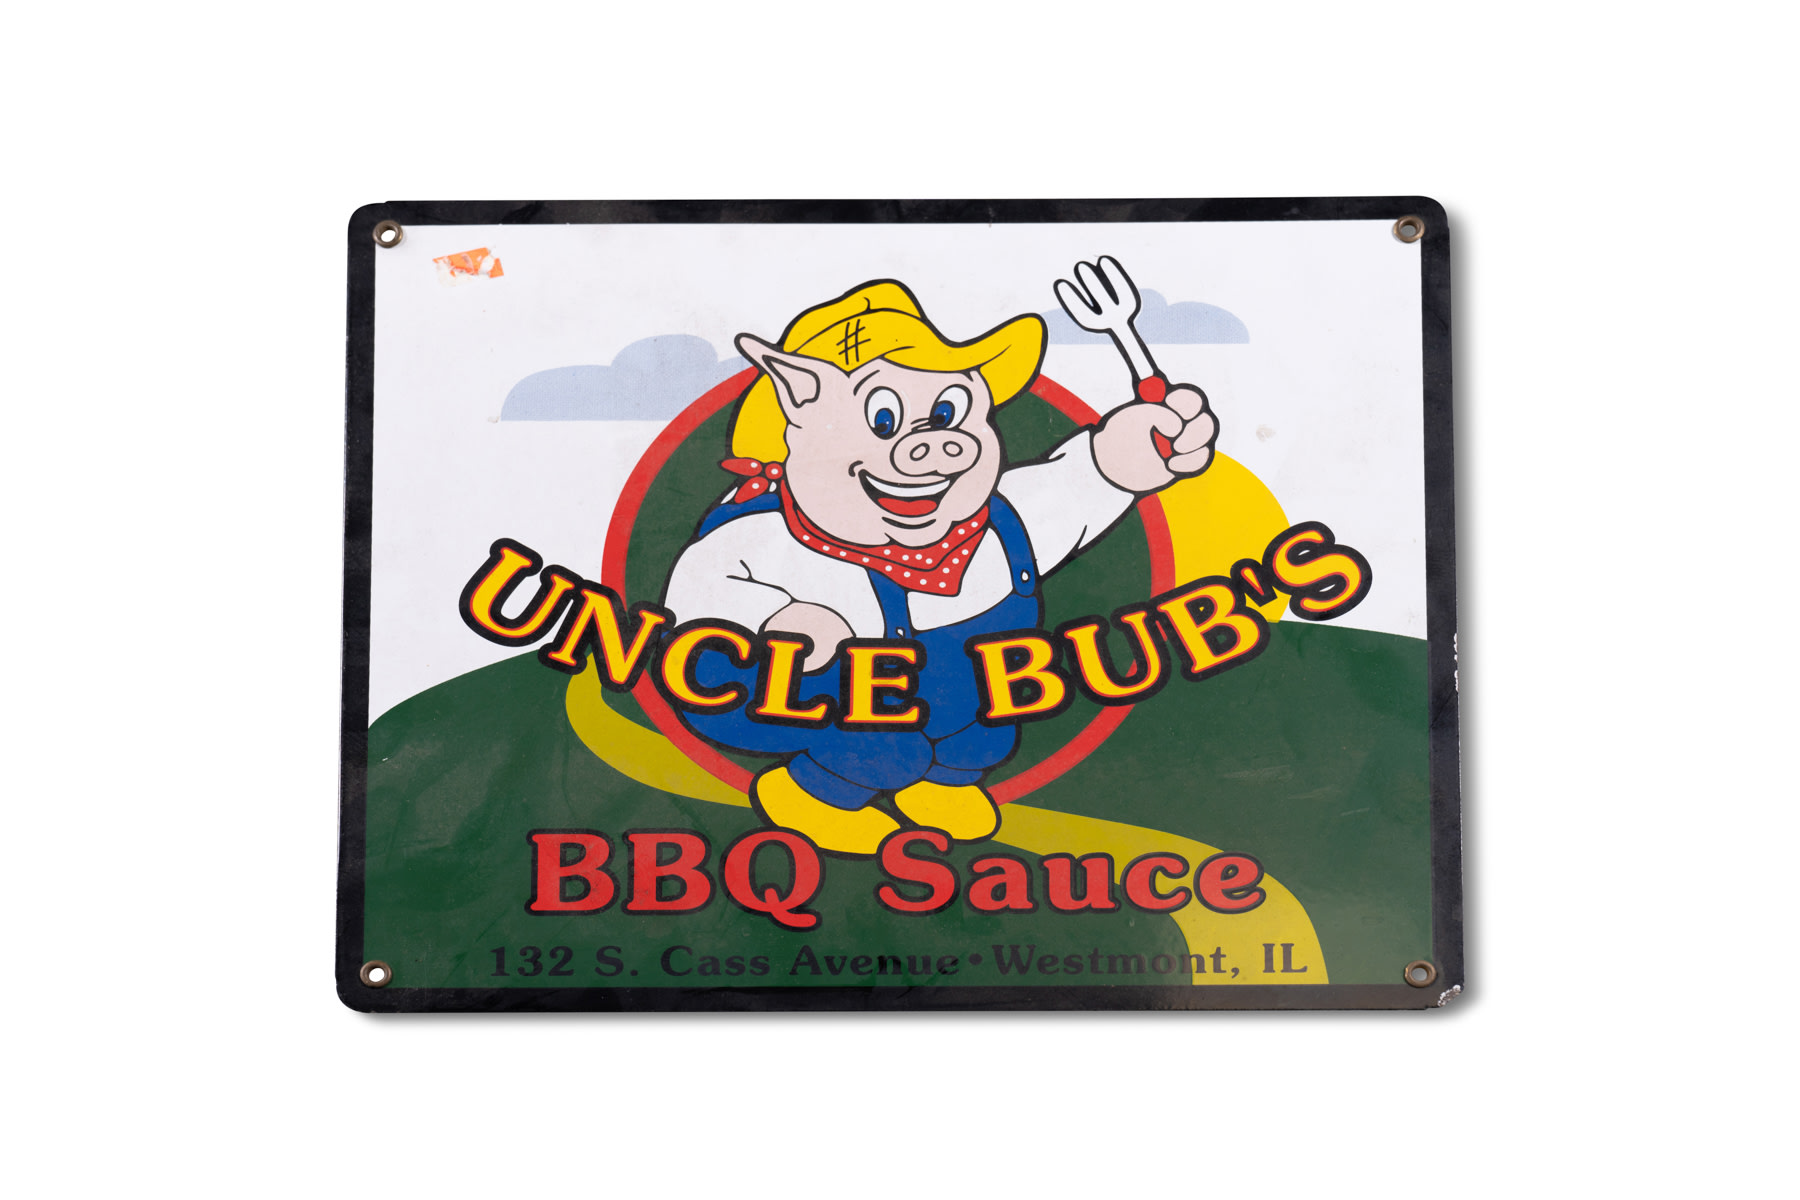 Uncle Bub's Barbecue Sauce Sign